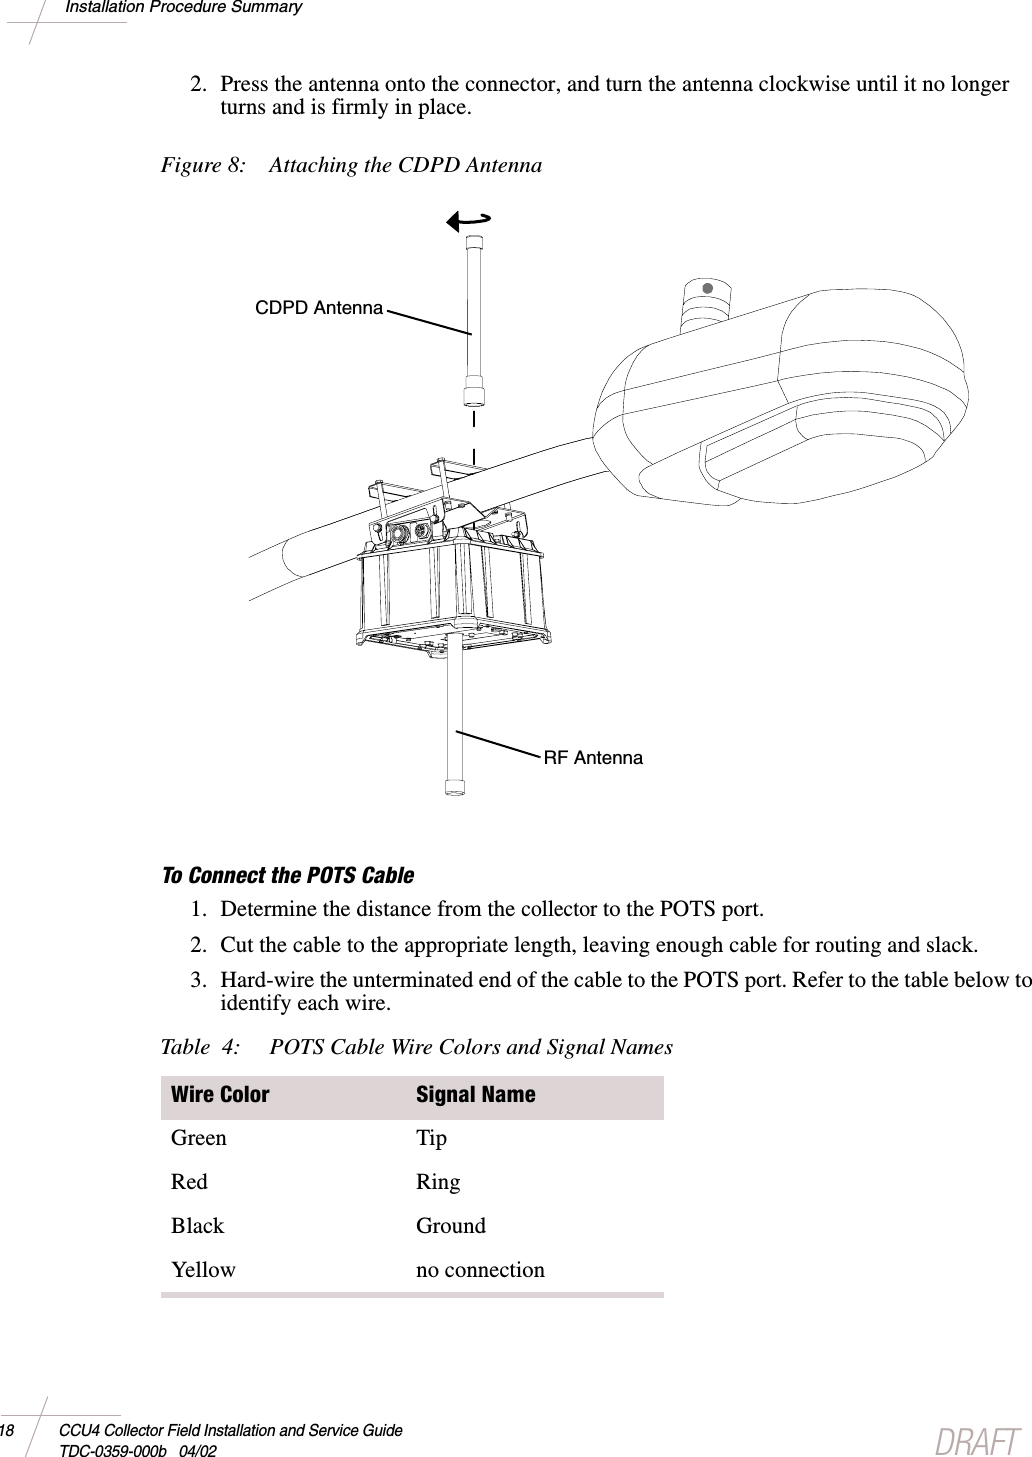 DRAFT18 CCU4 Collector Field Installation and Service GuideTDC-0359-000b 04/02Installation Procedure Summary2. Press the antenna onto the connector, and turn the antenna clockwise until it no longerturns and is firmly in place.Figure 8: Attaching the CDPD AntennaTo Connect the POTS Cable1. Determine the distance from thecollectorto the POTS port.2. Cut the cable to the appropriate length, leaving enough cable for routing and slack.3. Hard-wire the unterminated end of the cable to the POTS port. Refer to the table below toidentify each wire.Table 4: POTS Cable Wire Colors and Signal NamesWire Color Signal NameGreen TipRed RingBlack GroundYellow no connectionCDPD AntennaRF Antenna